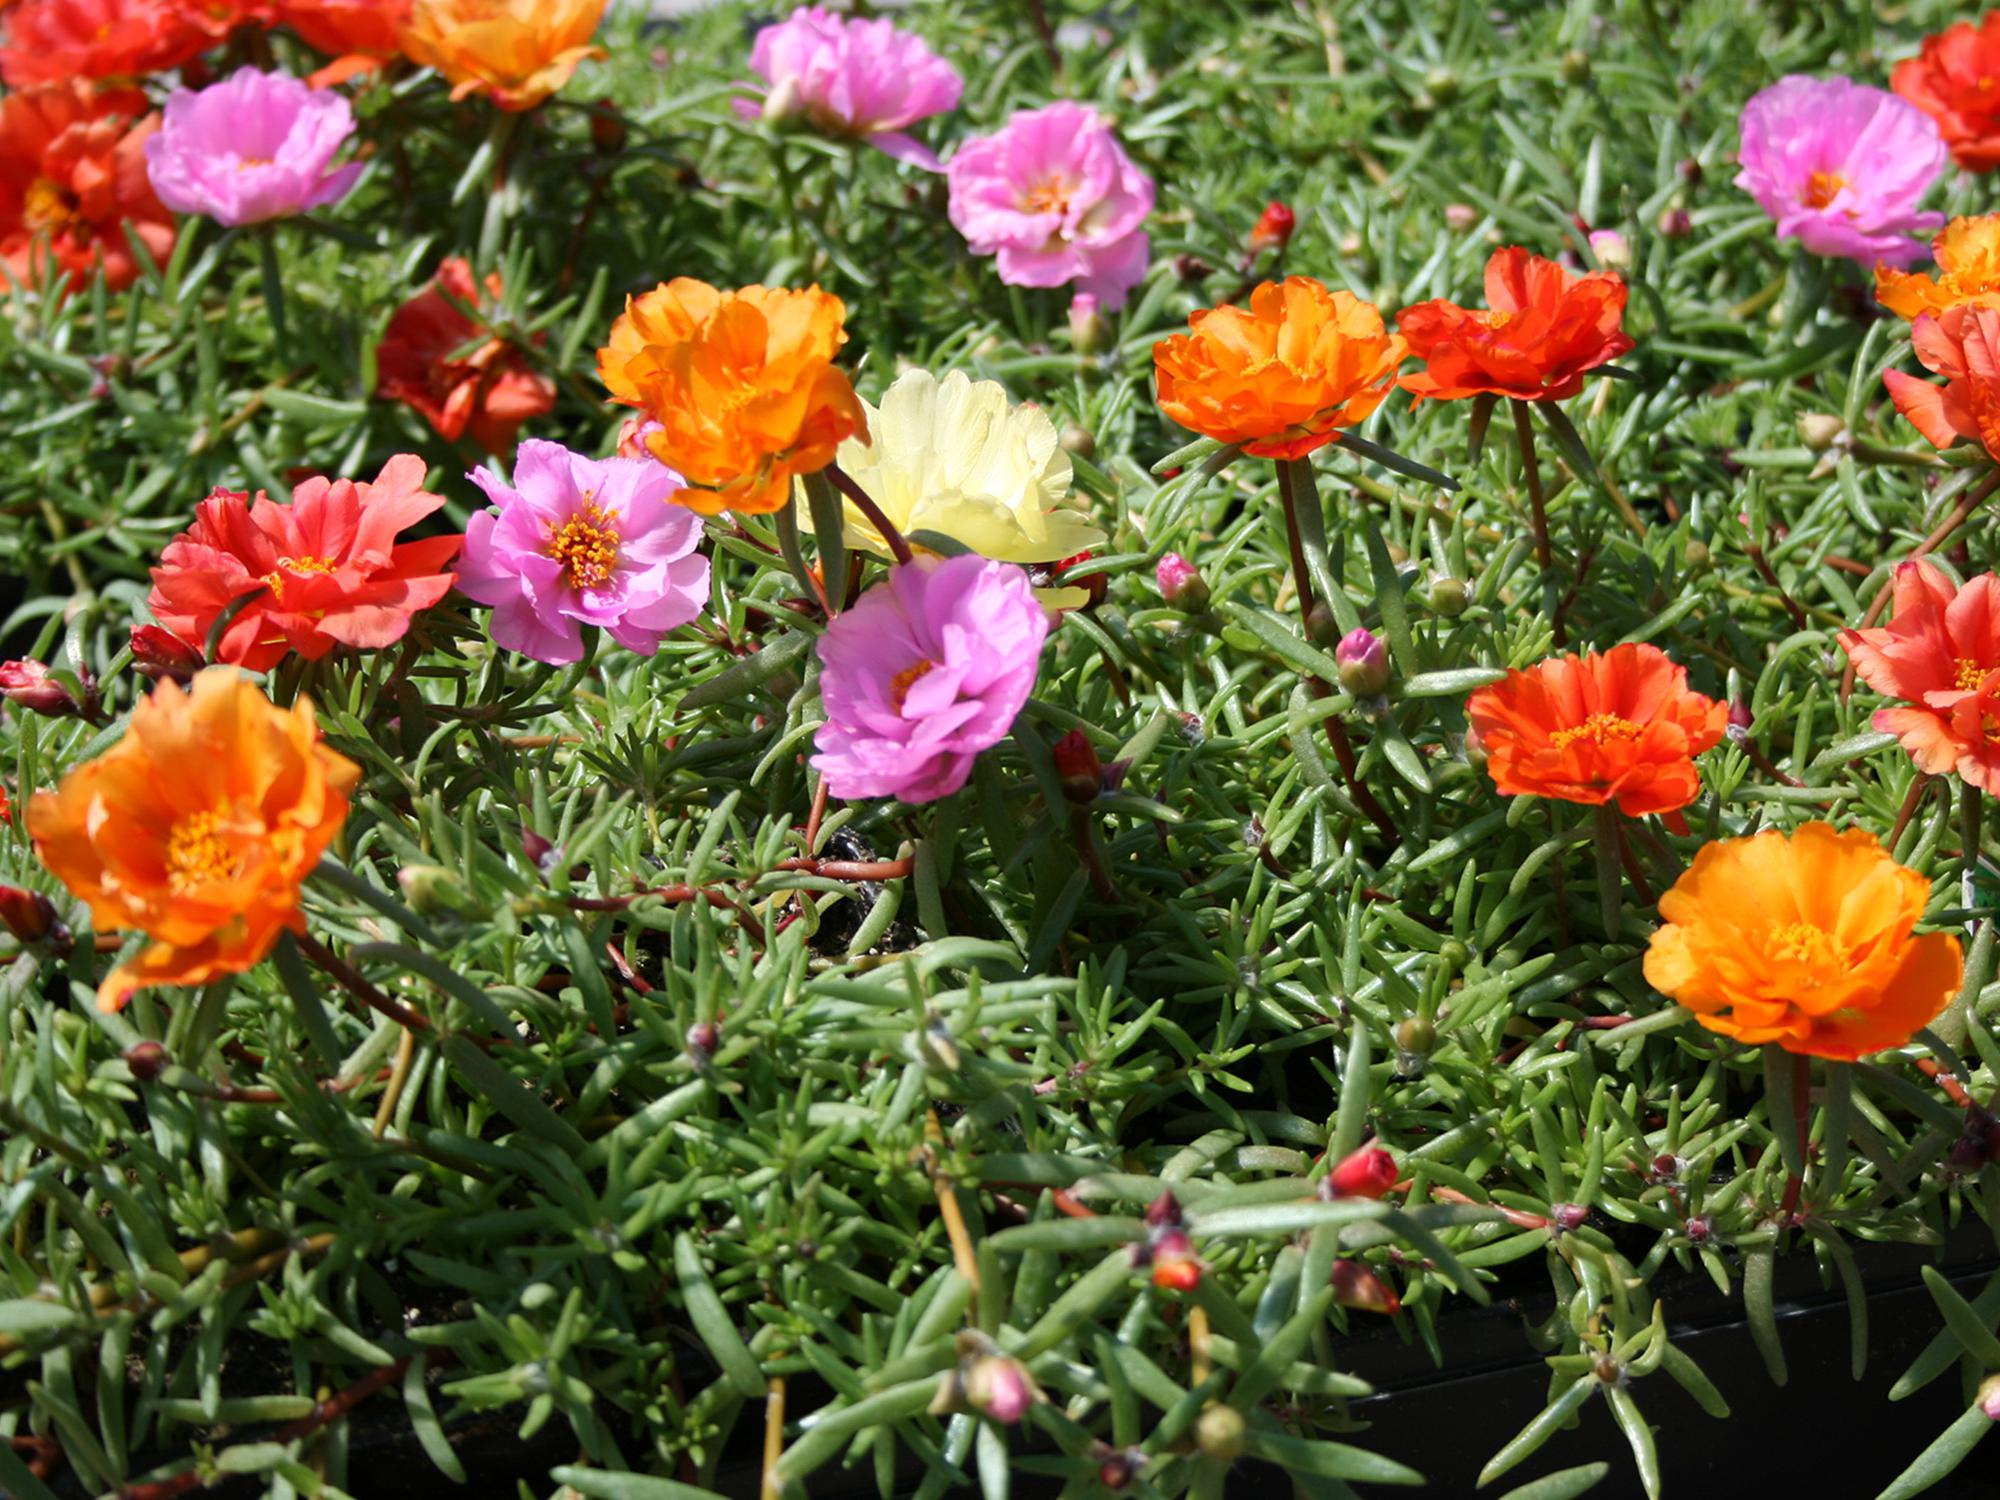 Moss rose is a great summer selection with blooms that resemble tiny roses and succulent foliage that withstands the heat. (Photo by MSU Extension/Gary Bachman)